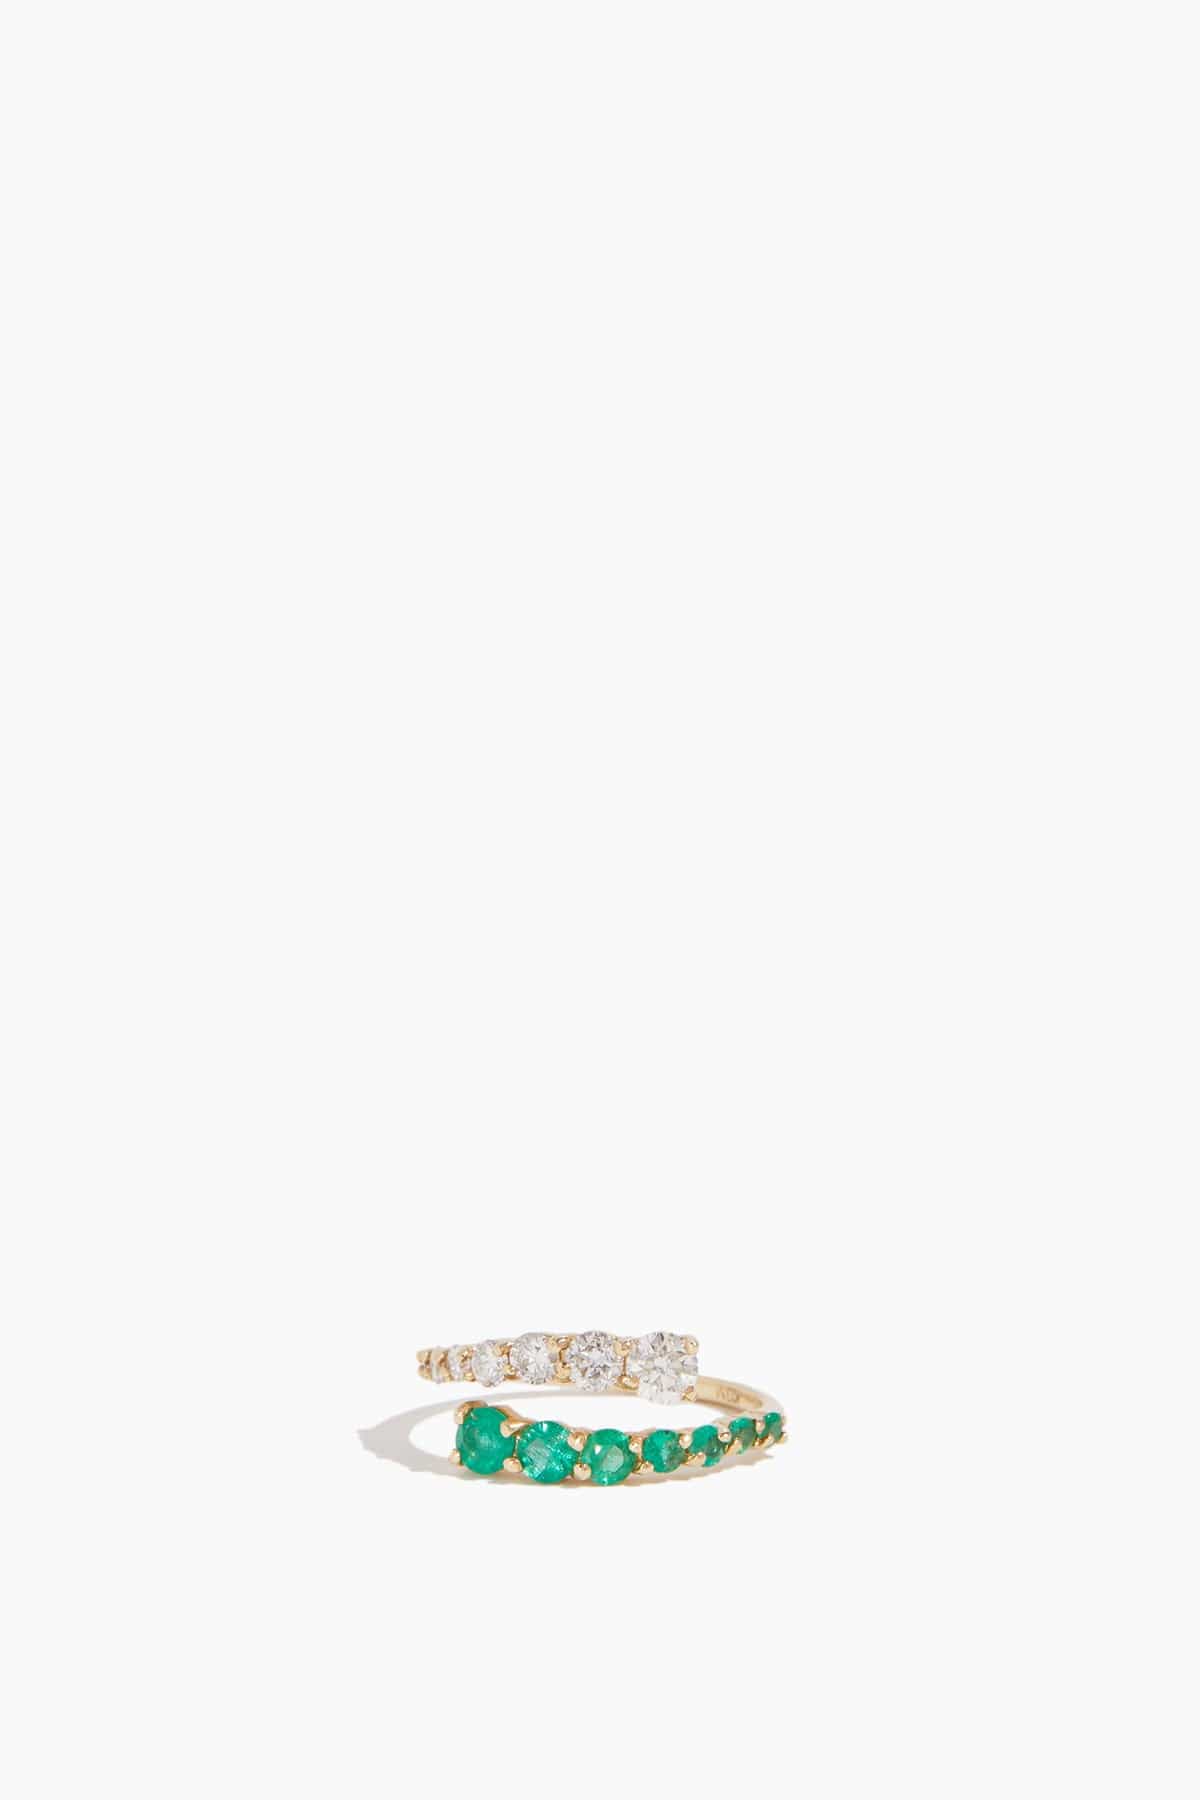 Stoned Fine Jewelry Moi et Toi Emerald + Diamond Ring in 14k Yellow Gold - Green - Size: One size